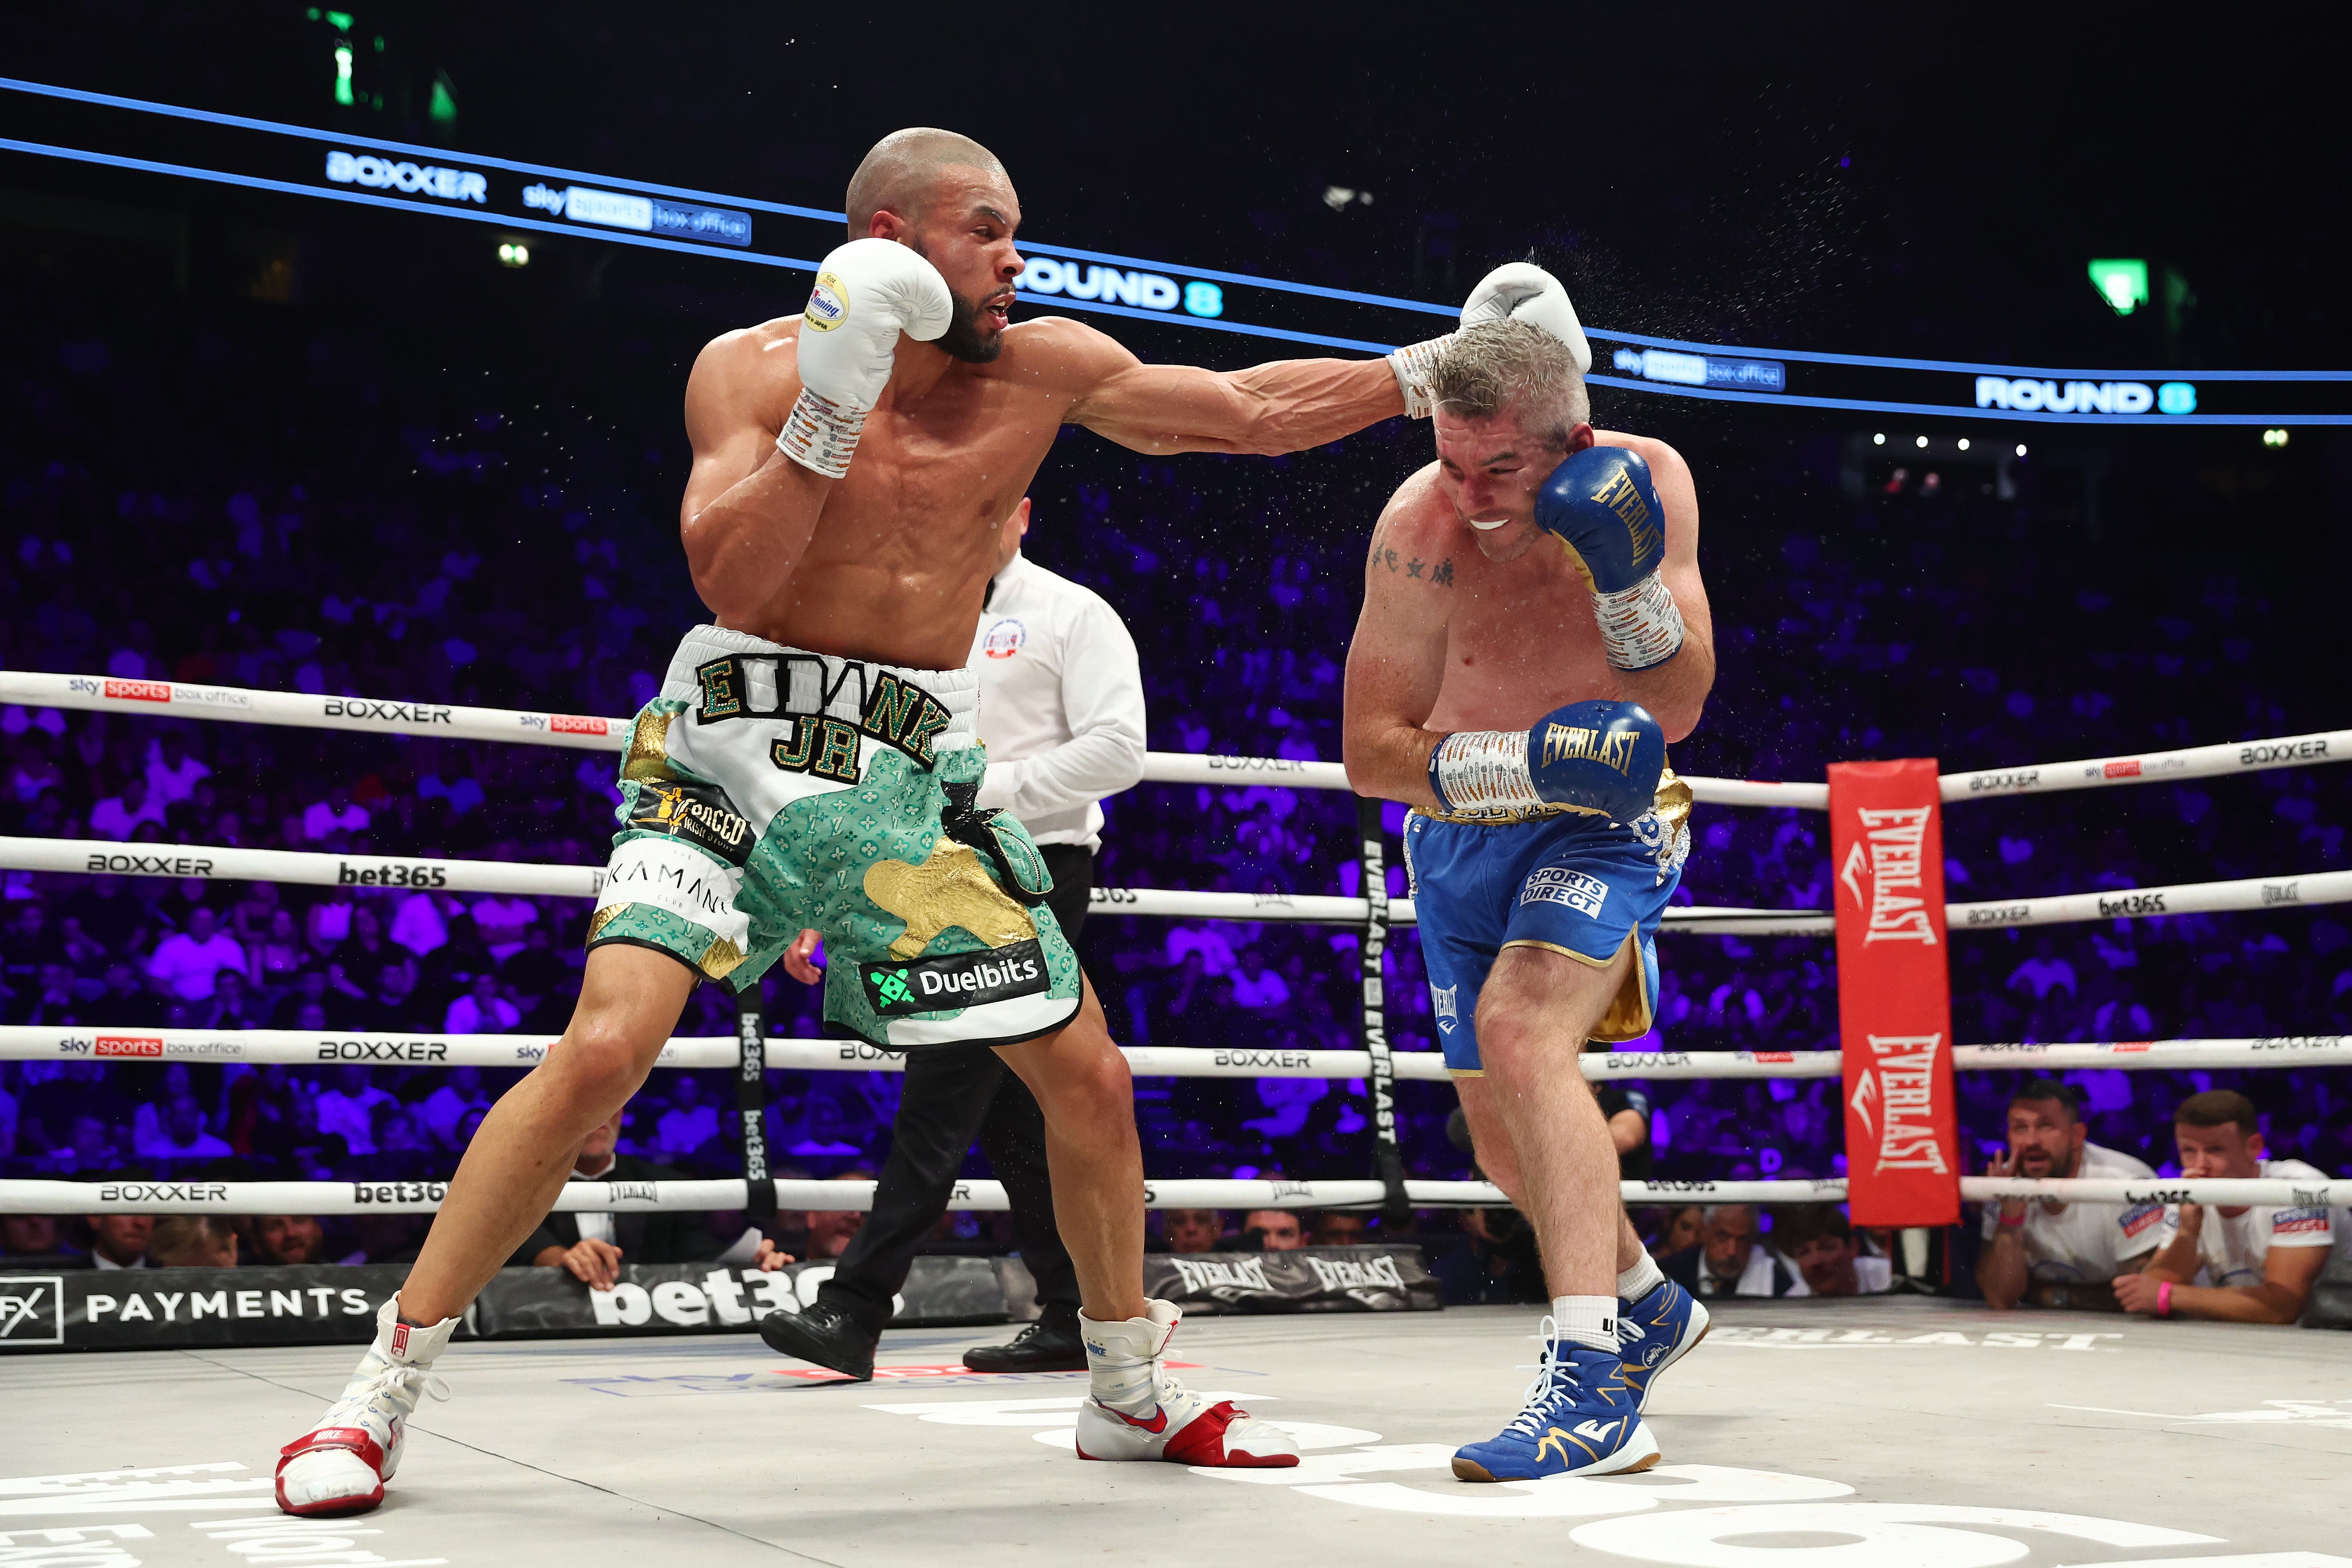 Chris Eubank avenged his defeat to Liam Smith with a dominant performance